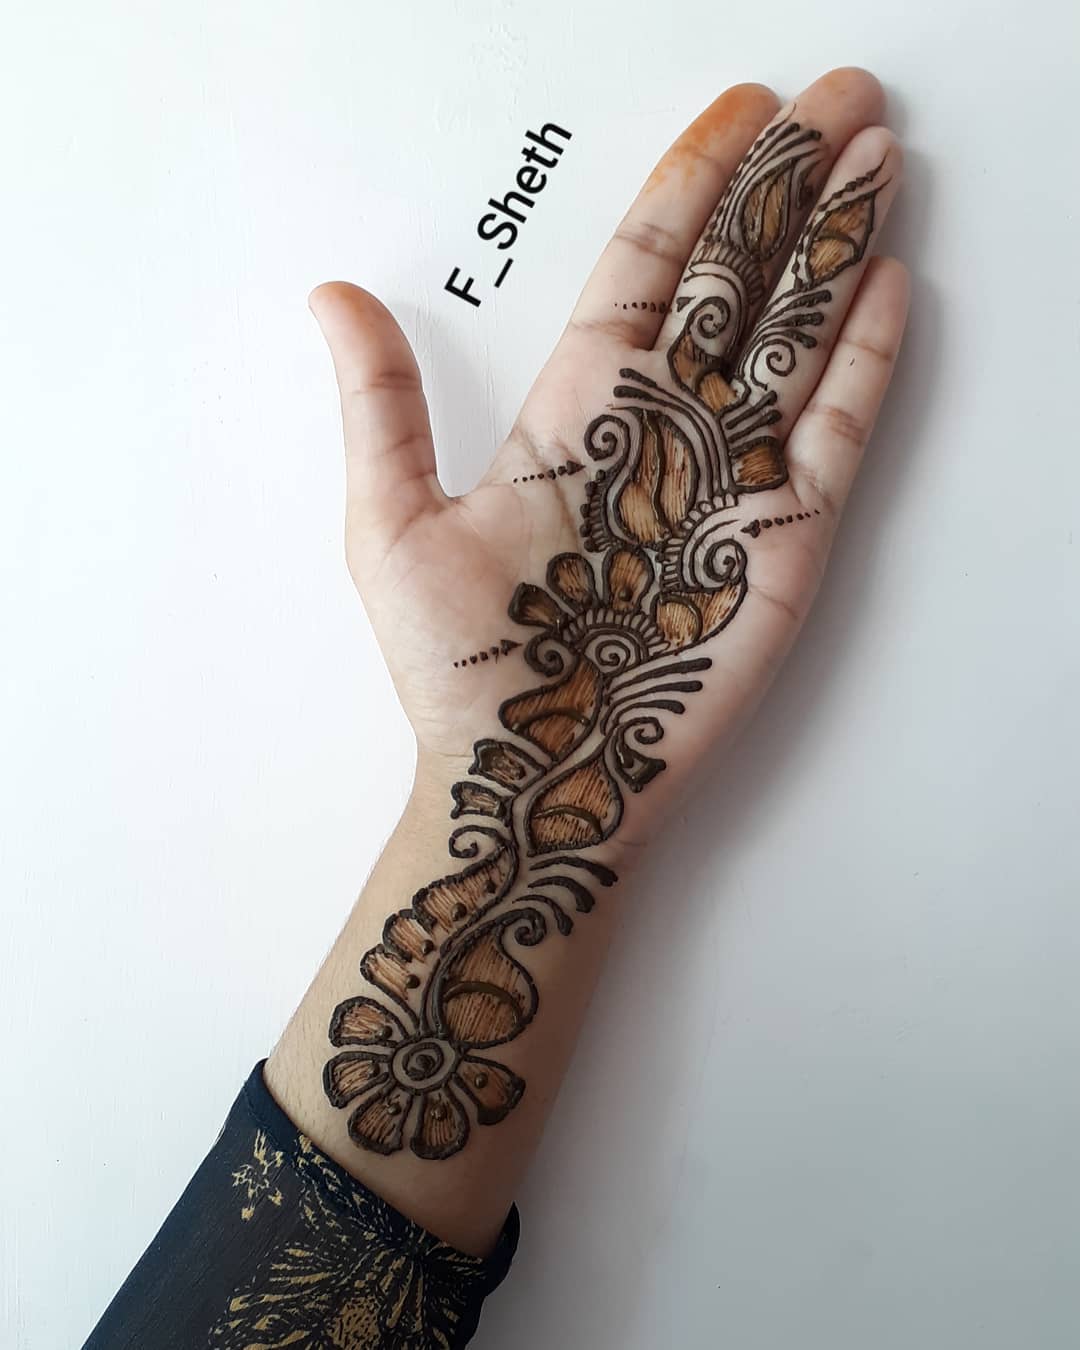 The Ultimate Collection of 999+ Latest Arabic Mehndi Design Images in ...